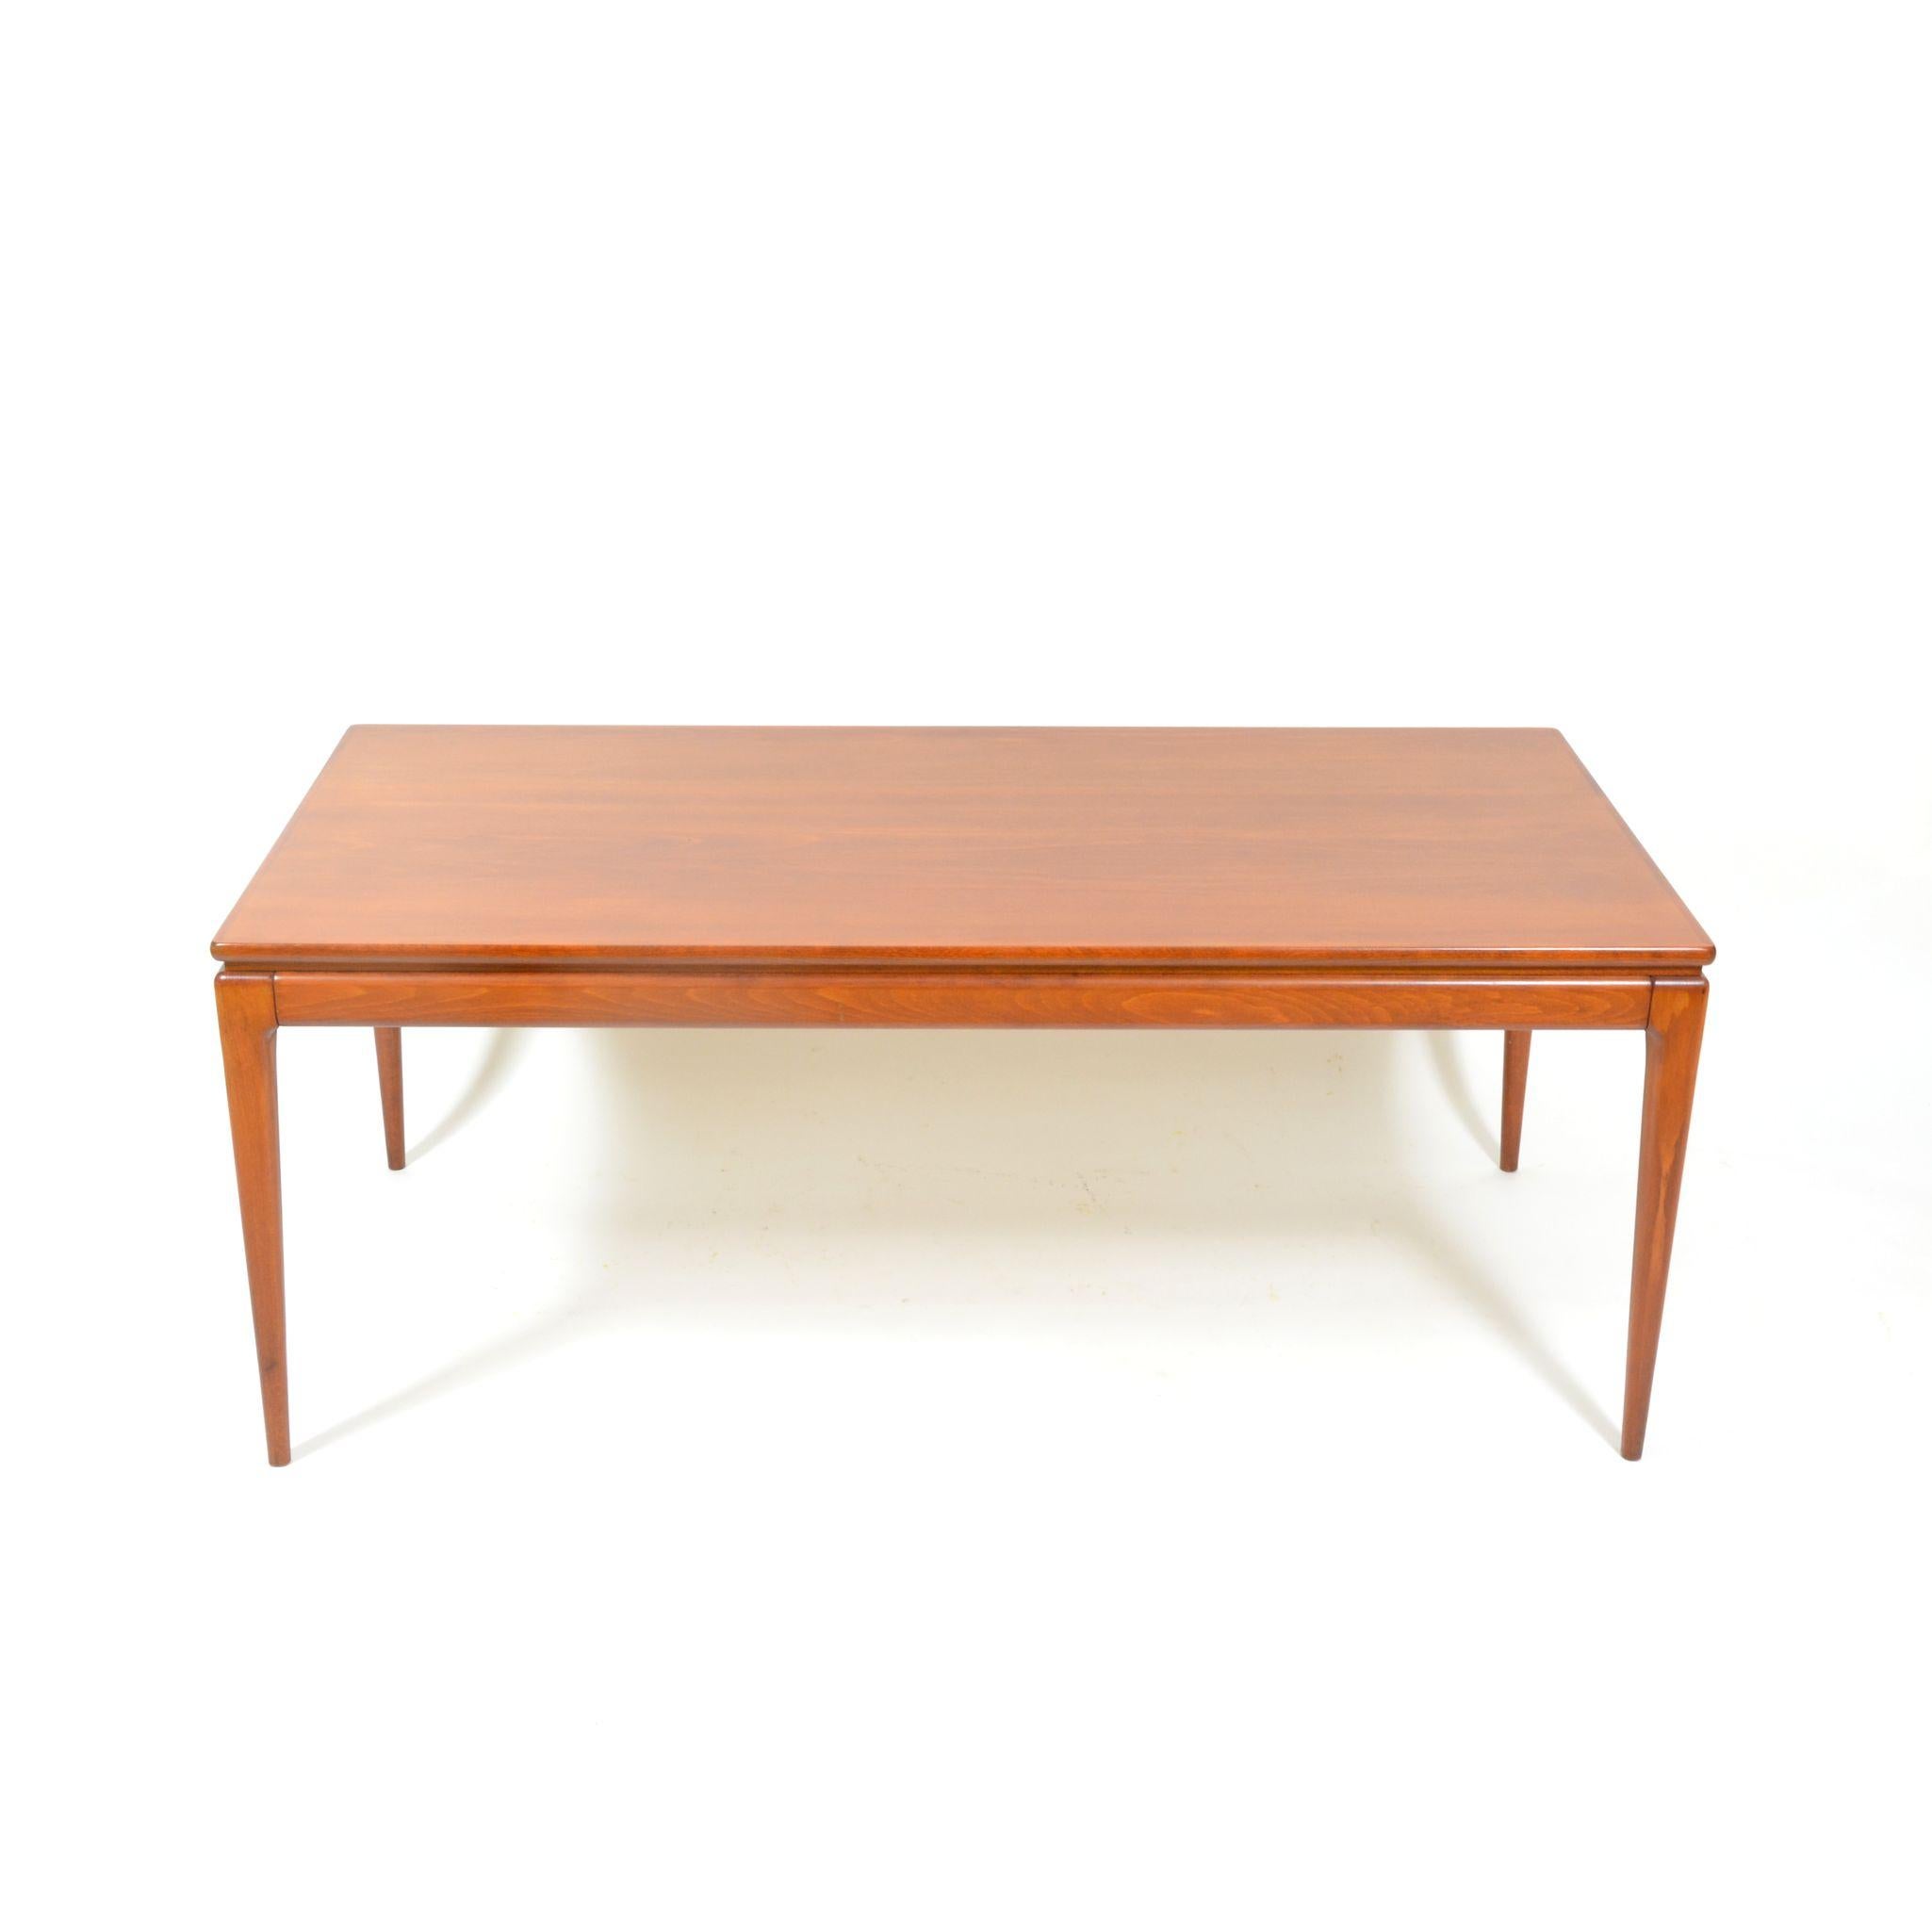 Coffee table in stained beech manufactured in 1980s in former Czechoslovakia by Drevotvar Jablonné. Shapes inspired by Scandinavian design. In very good original condition, only with some small sings of use.